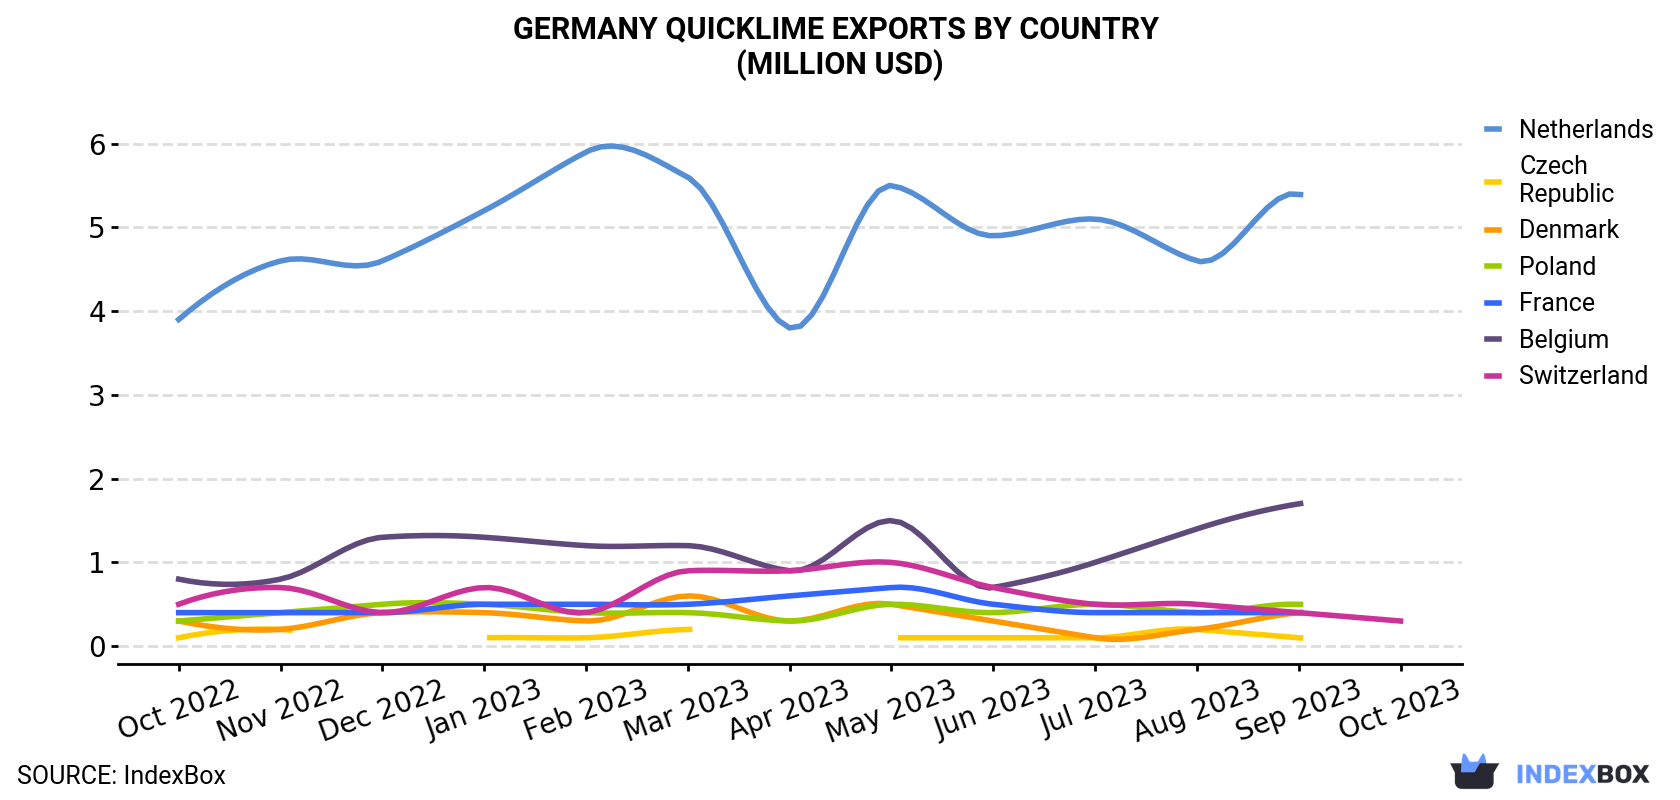 Germany Quicklime Exports By Country (Million USD)